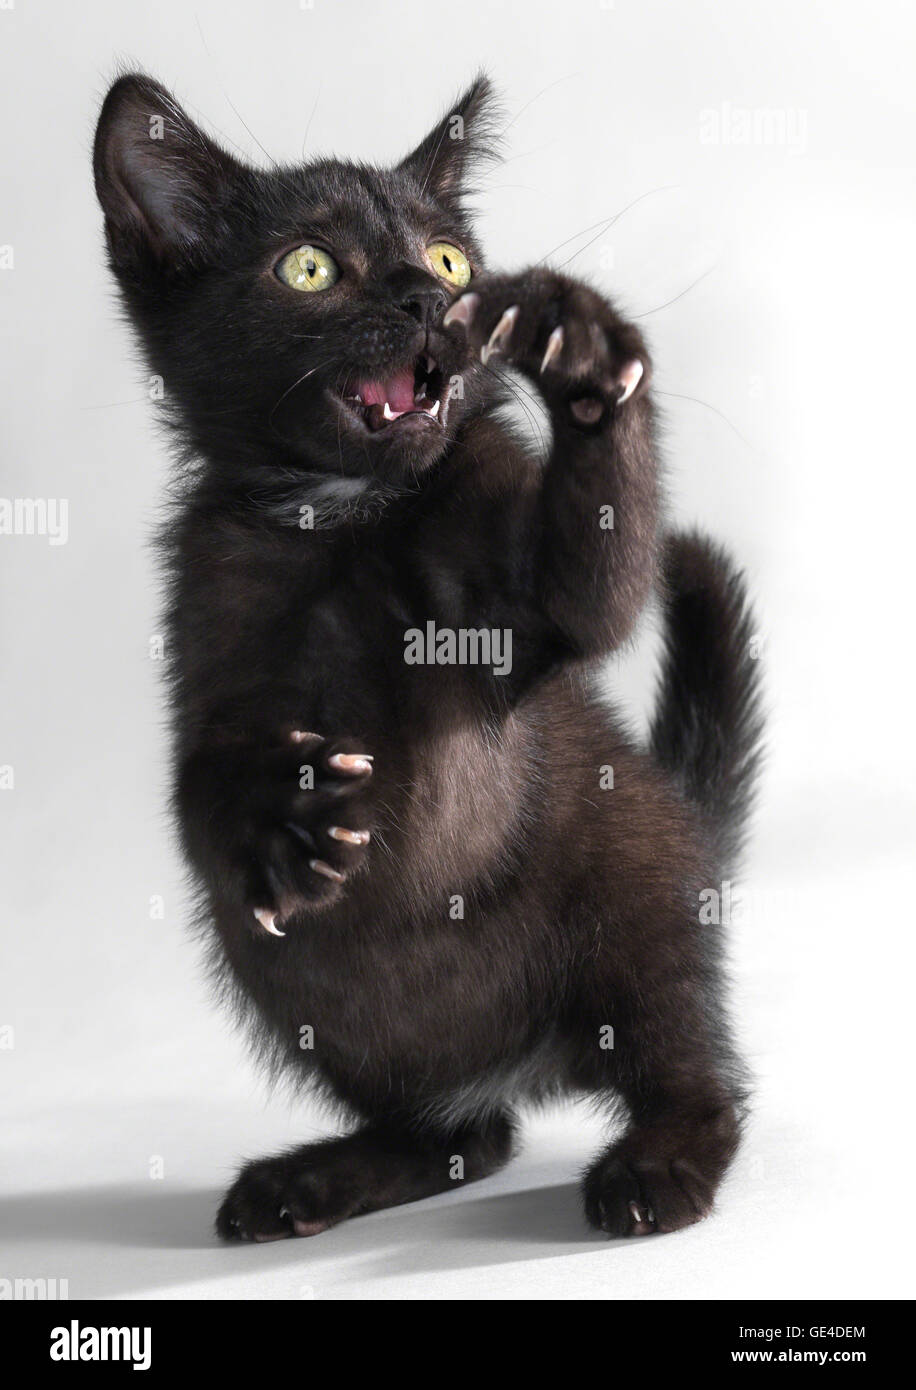 Black kitten standing on hind legs claws out snarling Stock Photo